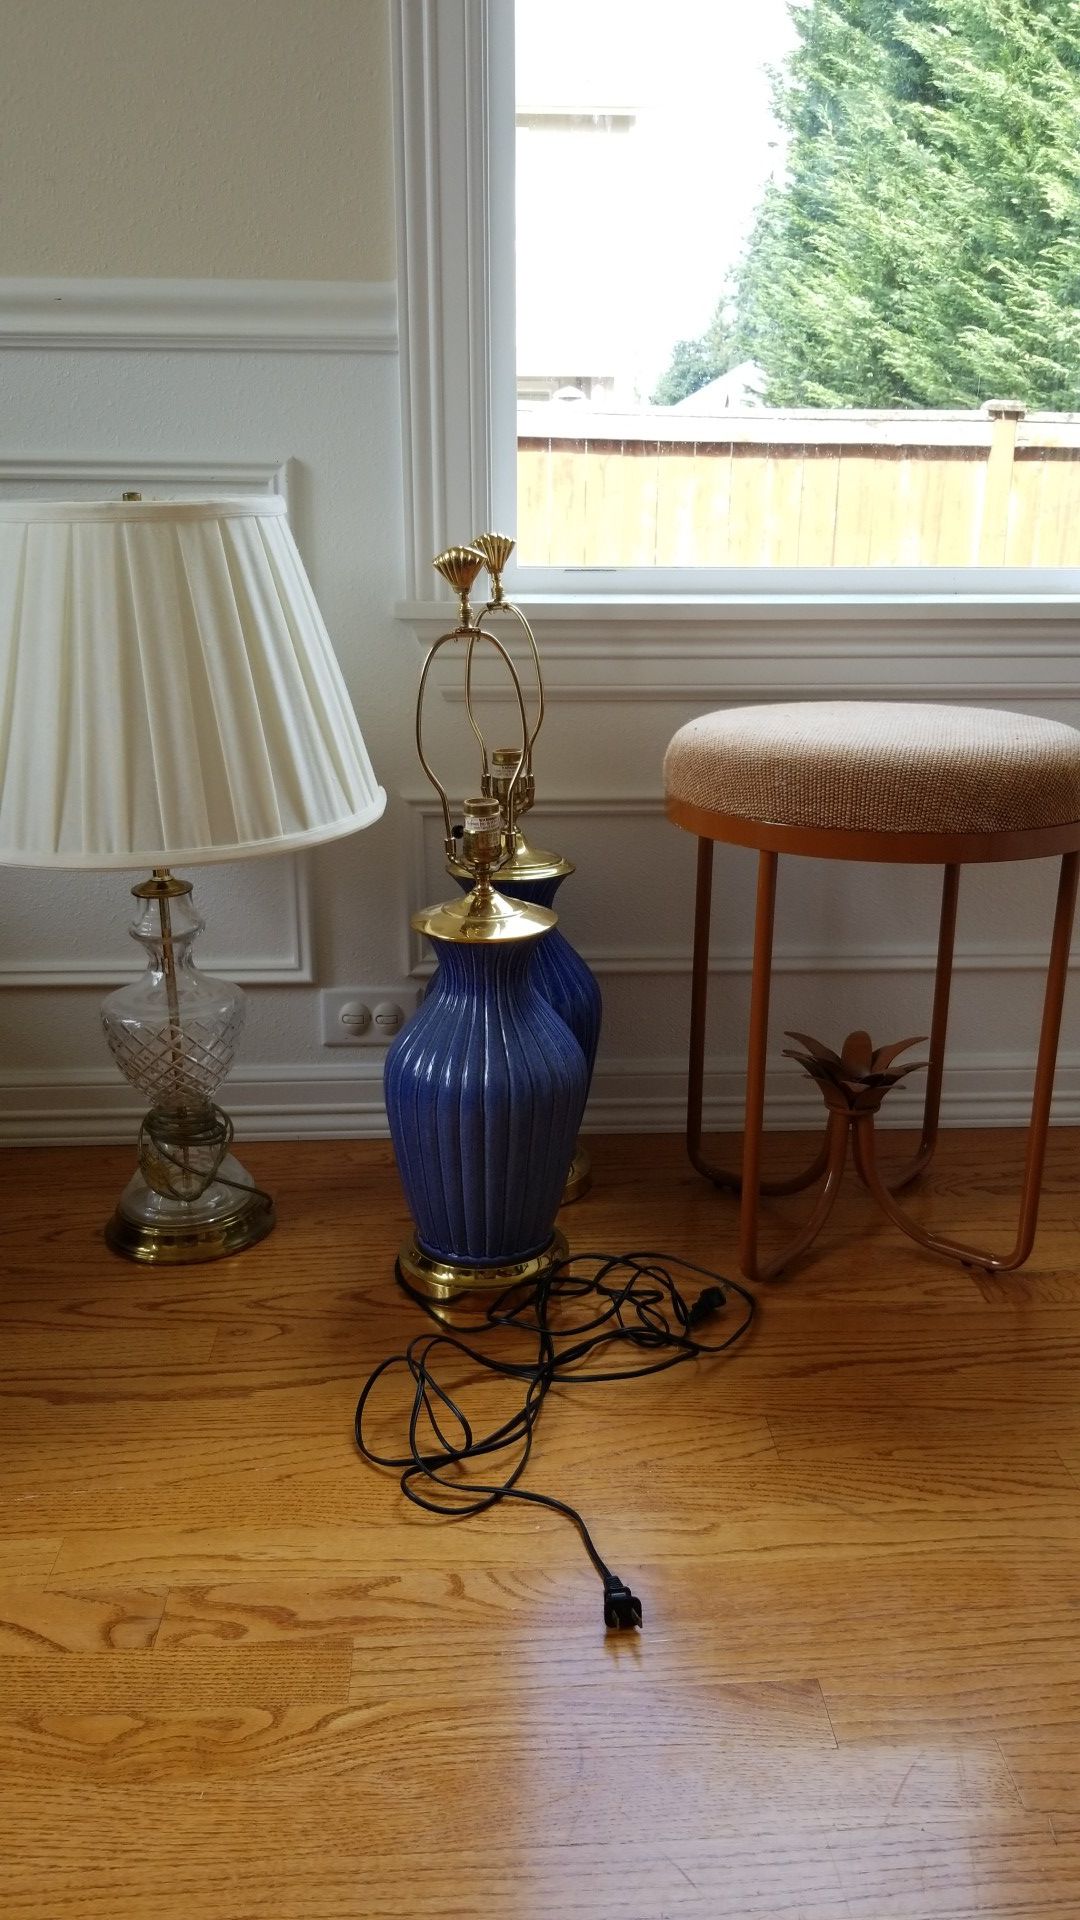 Lamps, stool $10 each